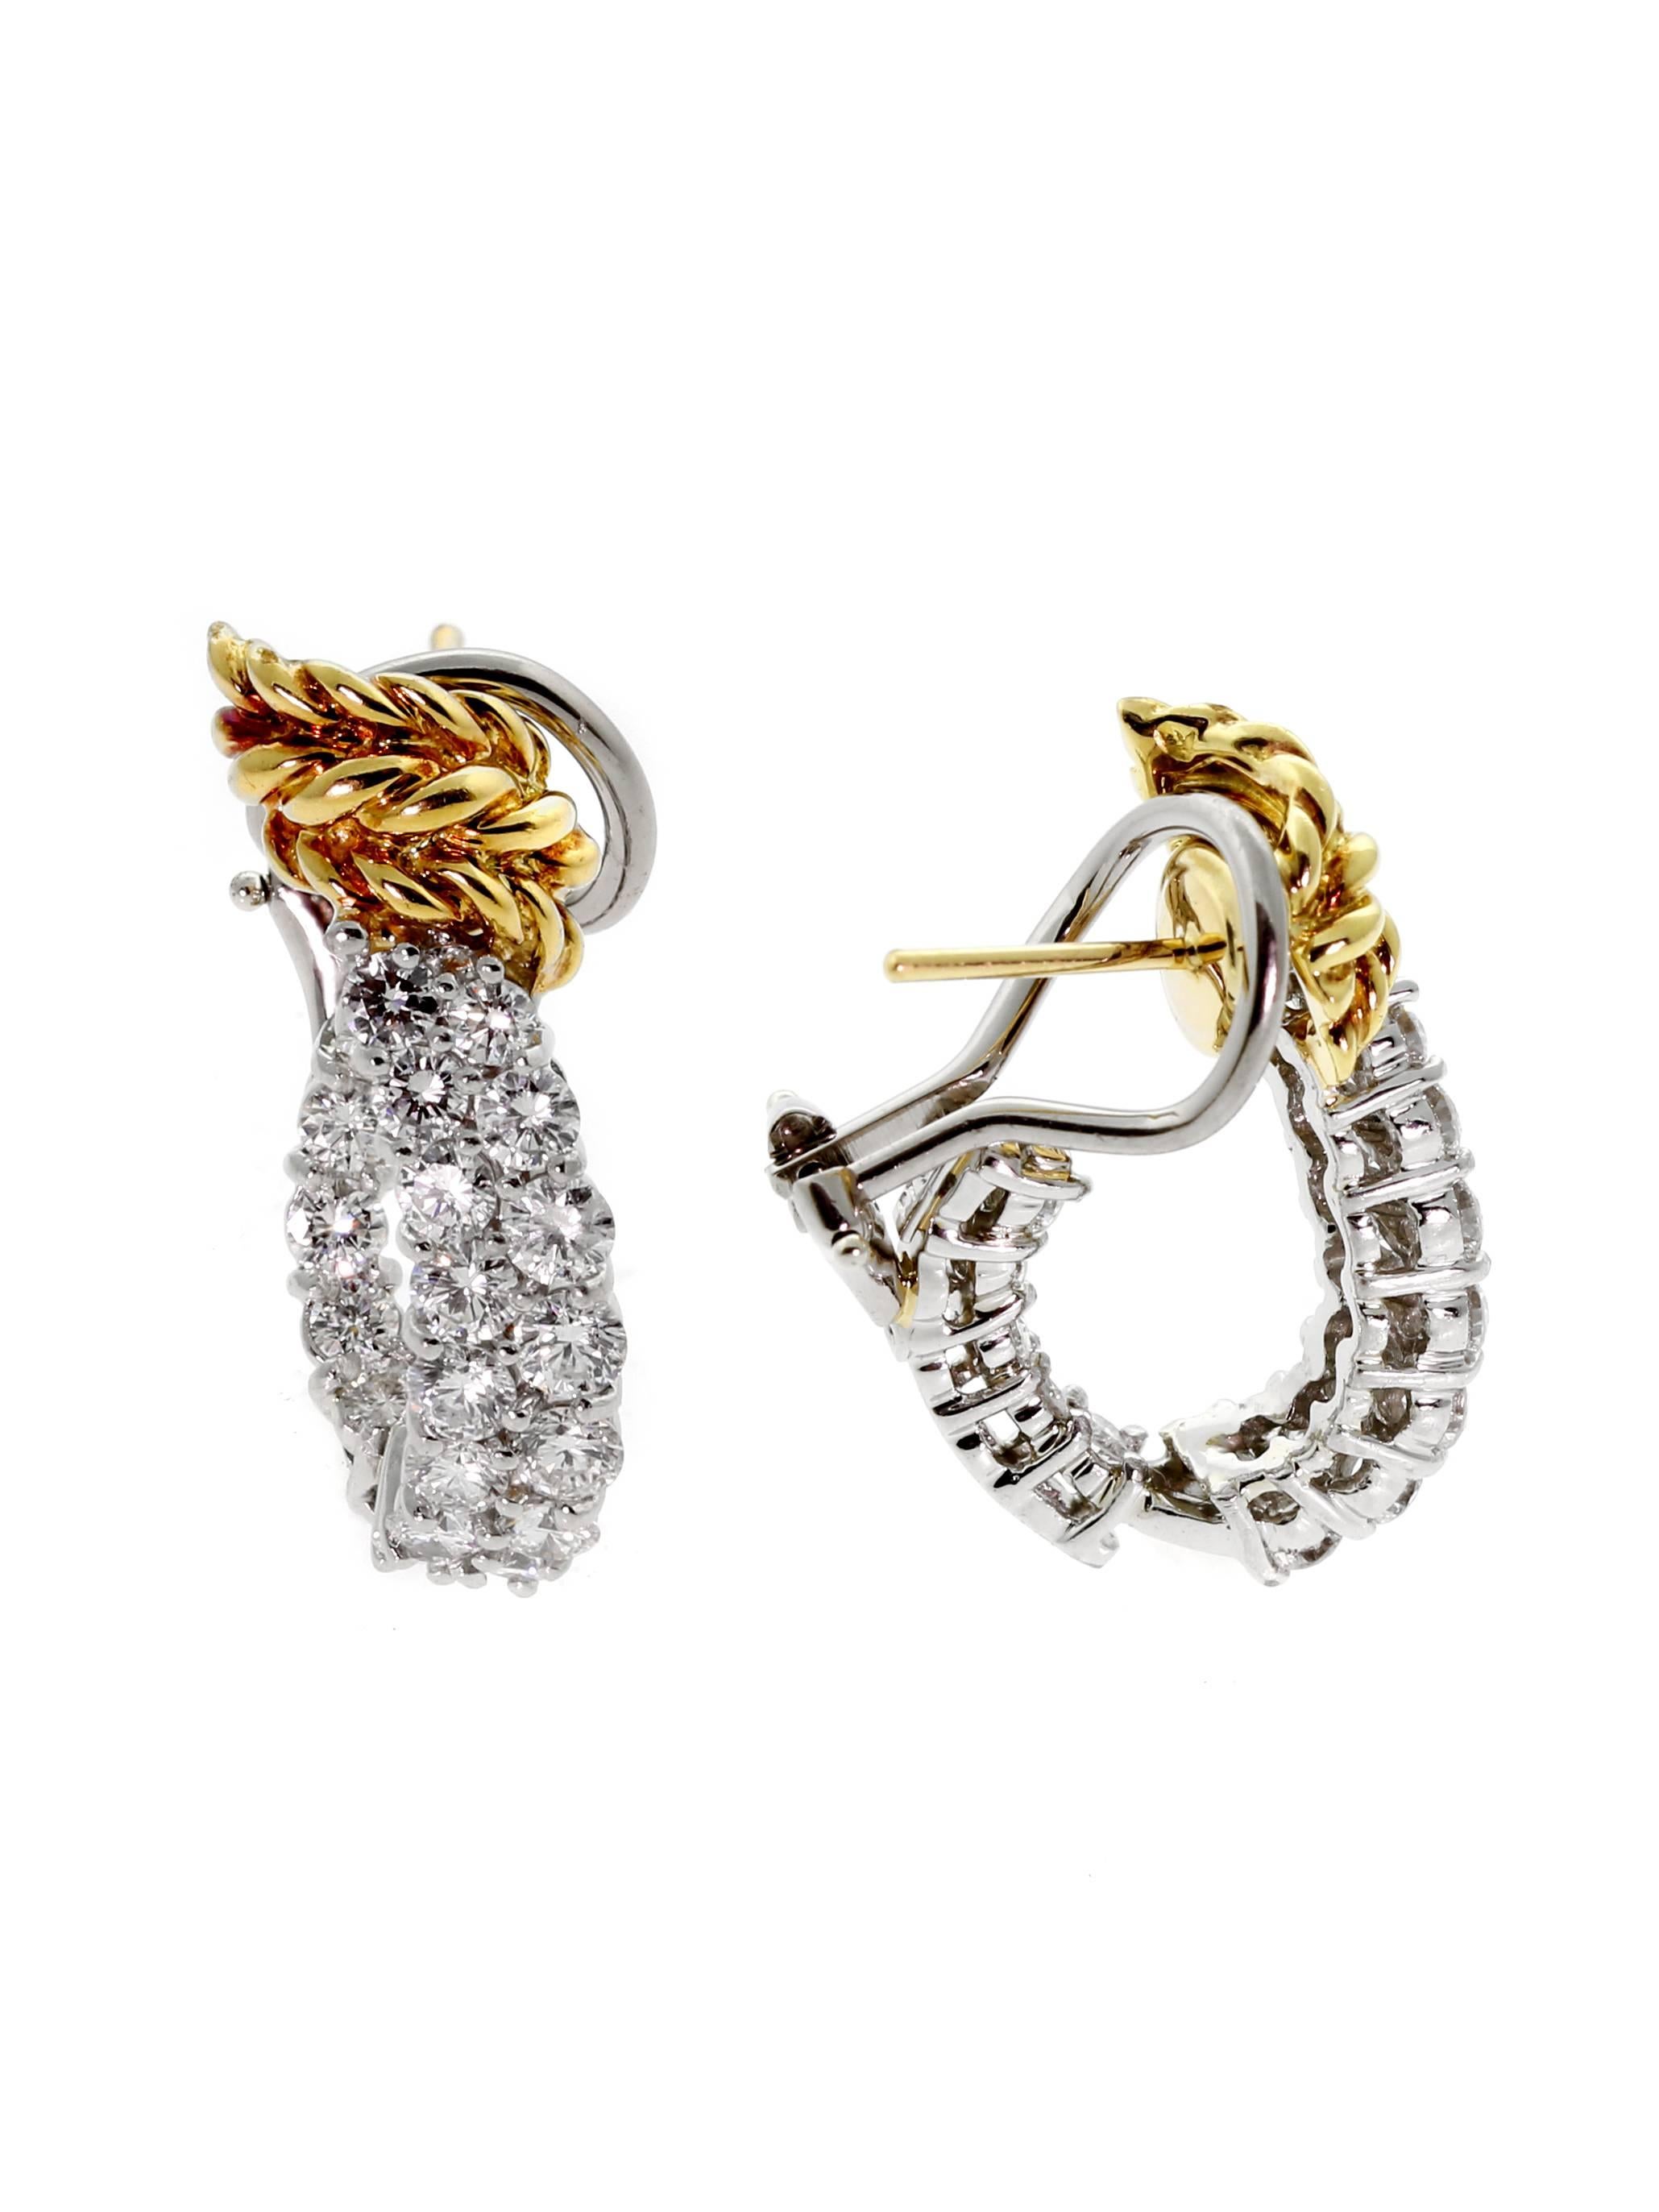 Tiffany & Co Schlumberger diamond earrings adorned with round brilliant cut diamonds set in Platinum and touched with 18k yellow gold. The earrings measure 1" in length.

Inventory ID: 0000369